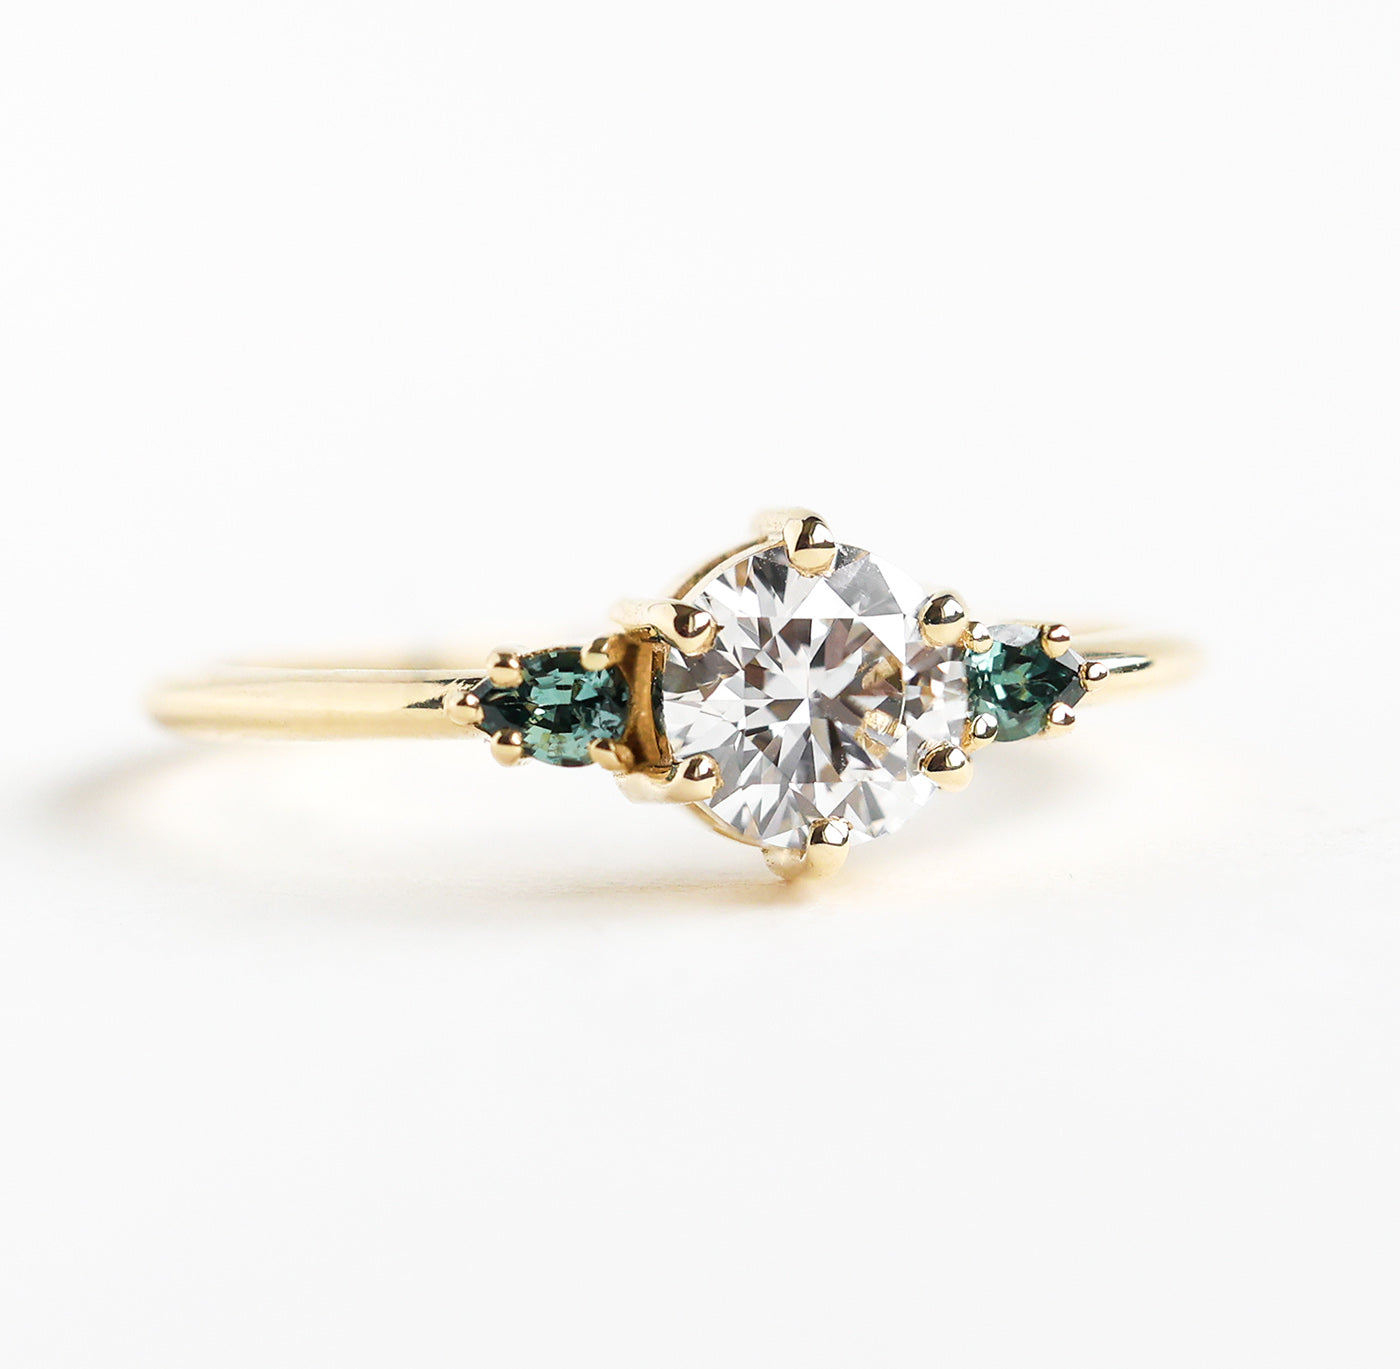 Round white diamond ring with teal pear-shaped sapphires